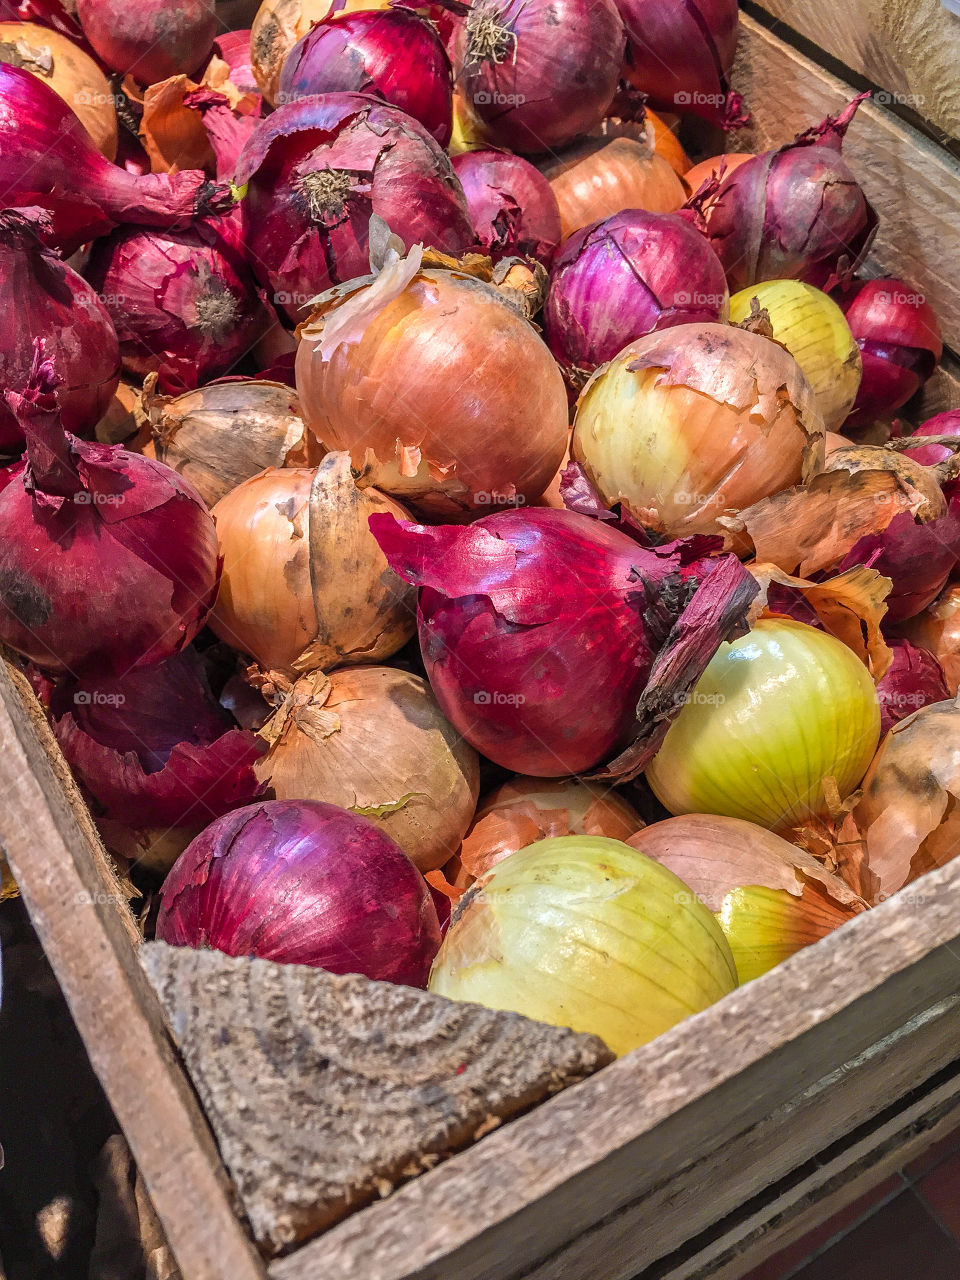 Wooden box with mixed food onions for sale at farmers market in Sweden in fall.